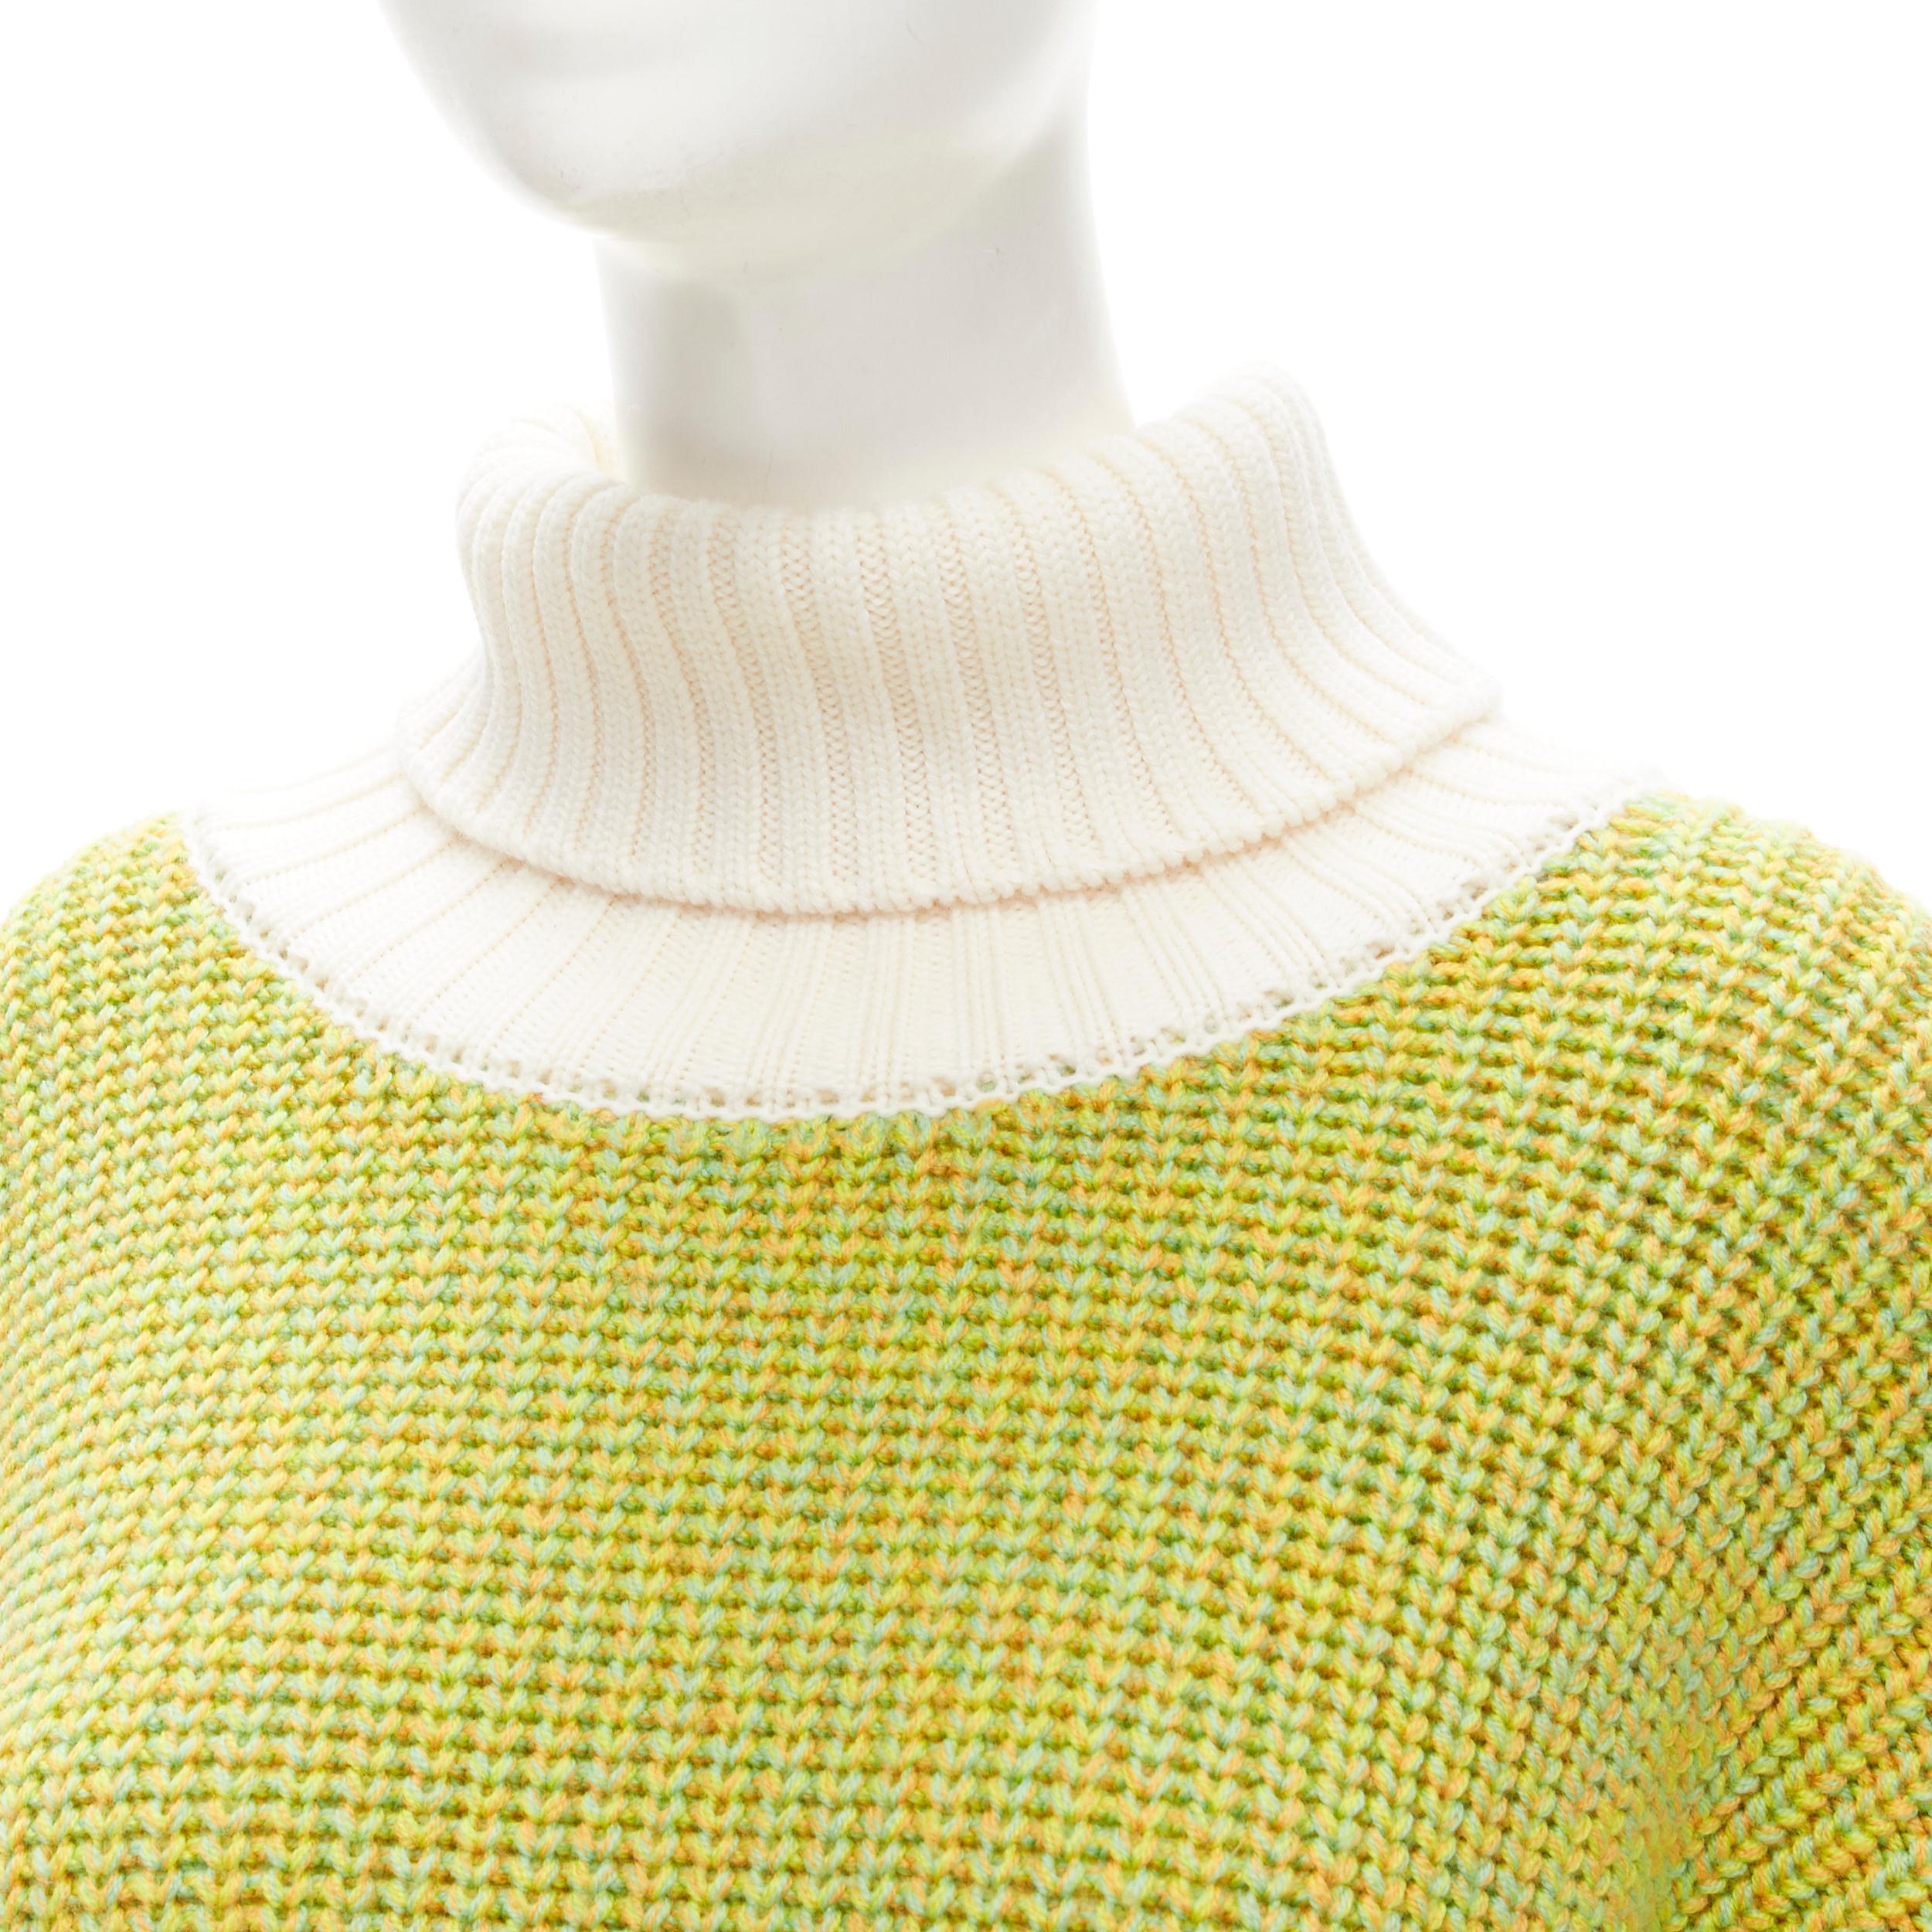 TIBI 100% merino wool lime yellow contrast rolled turtleneck sweater M/L
Brand: Tibi
Material: Merino Wool
Color: Green
Pattern: Solid
Extra Detail: Rolled turtleneck. Dropped shoulder. Very oversized fit.
Made in: China

CONDITION:
Condition: